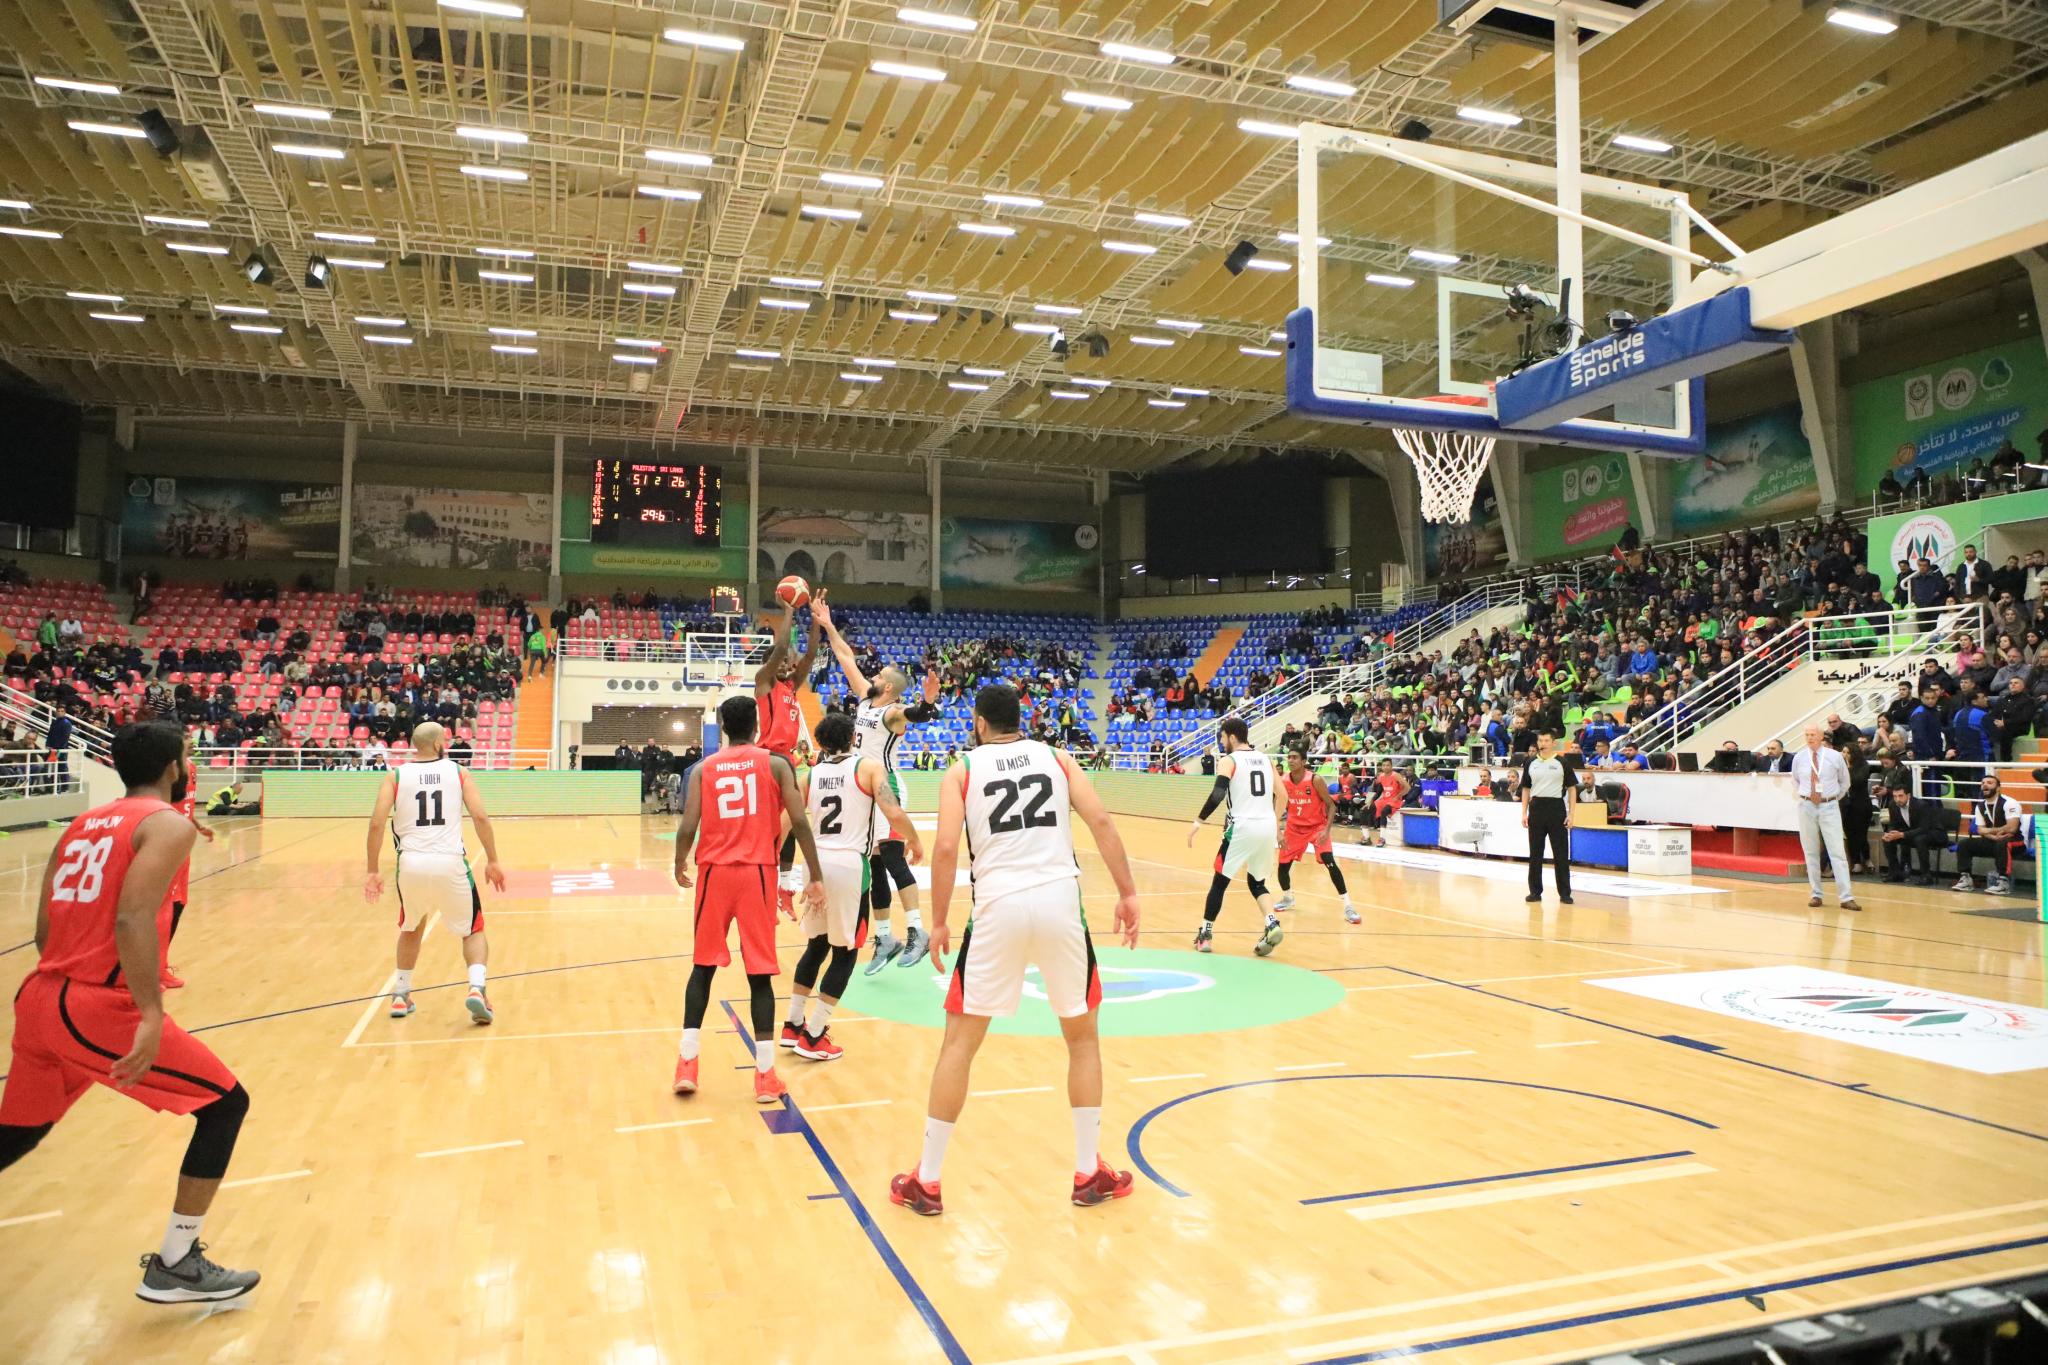 The Basketball game between the Palestinian team and Sri Lanka team in the Sport Hall